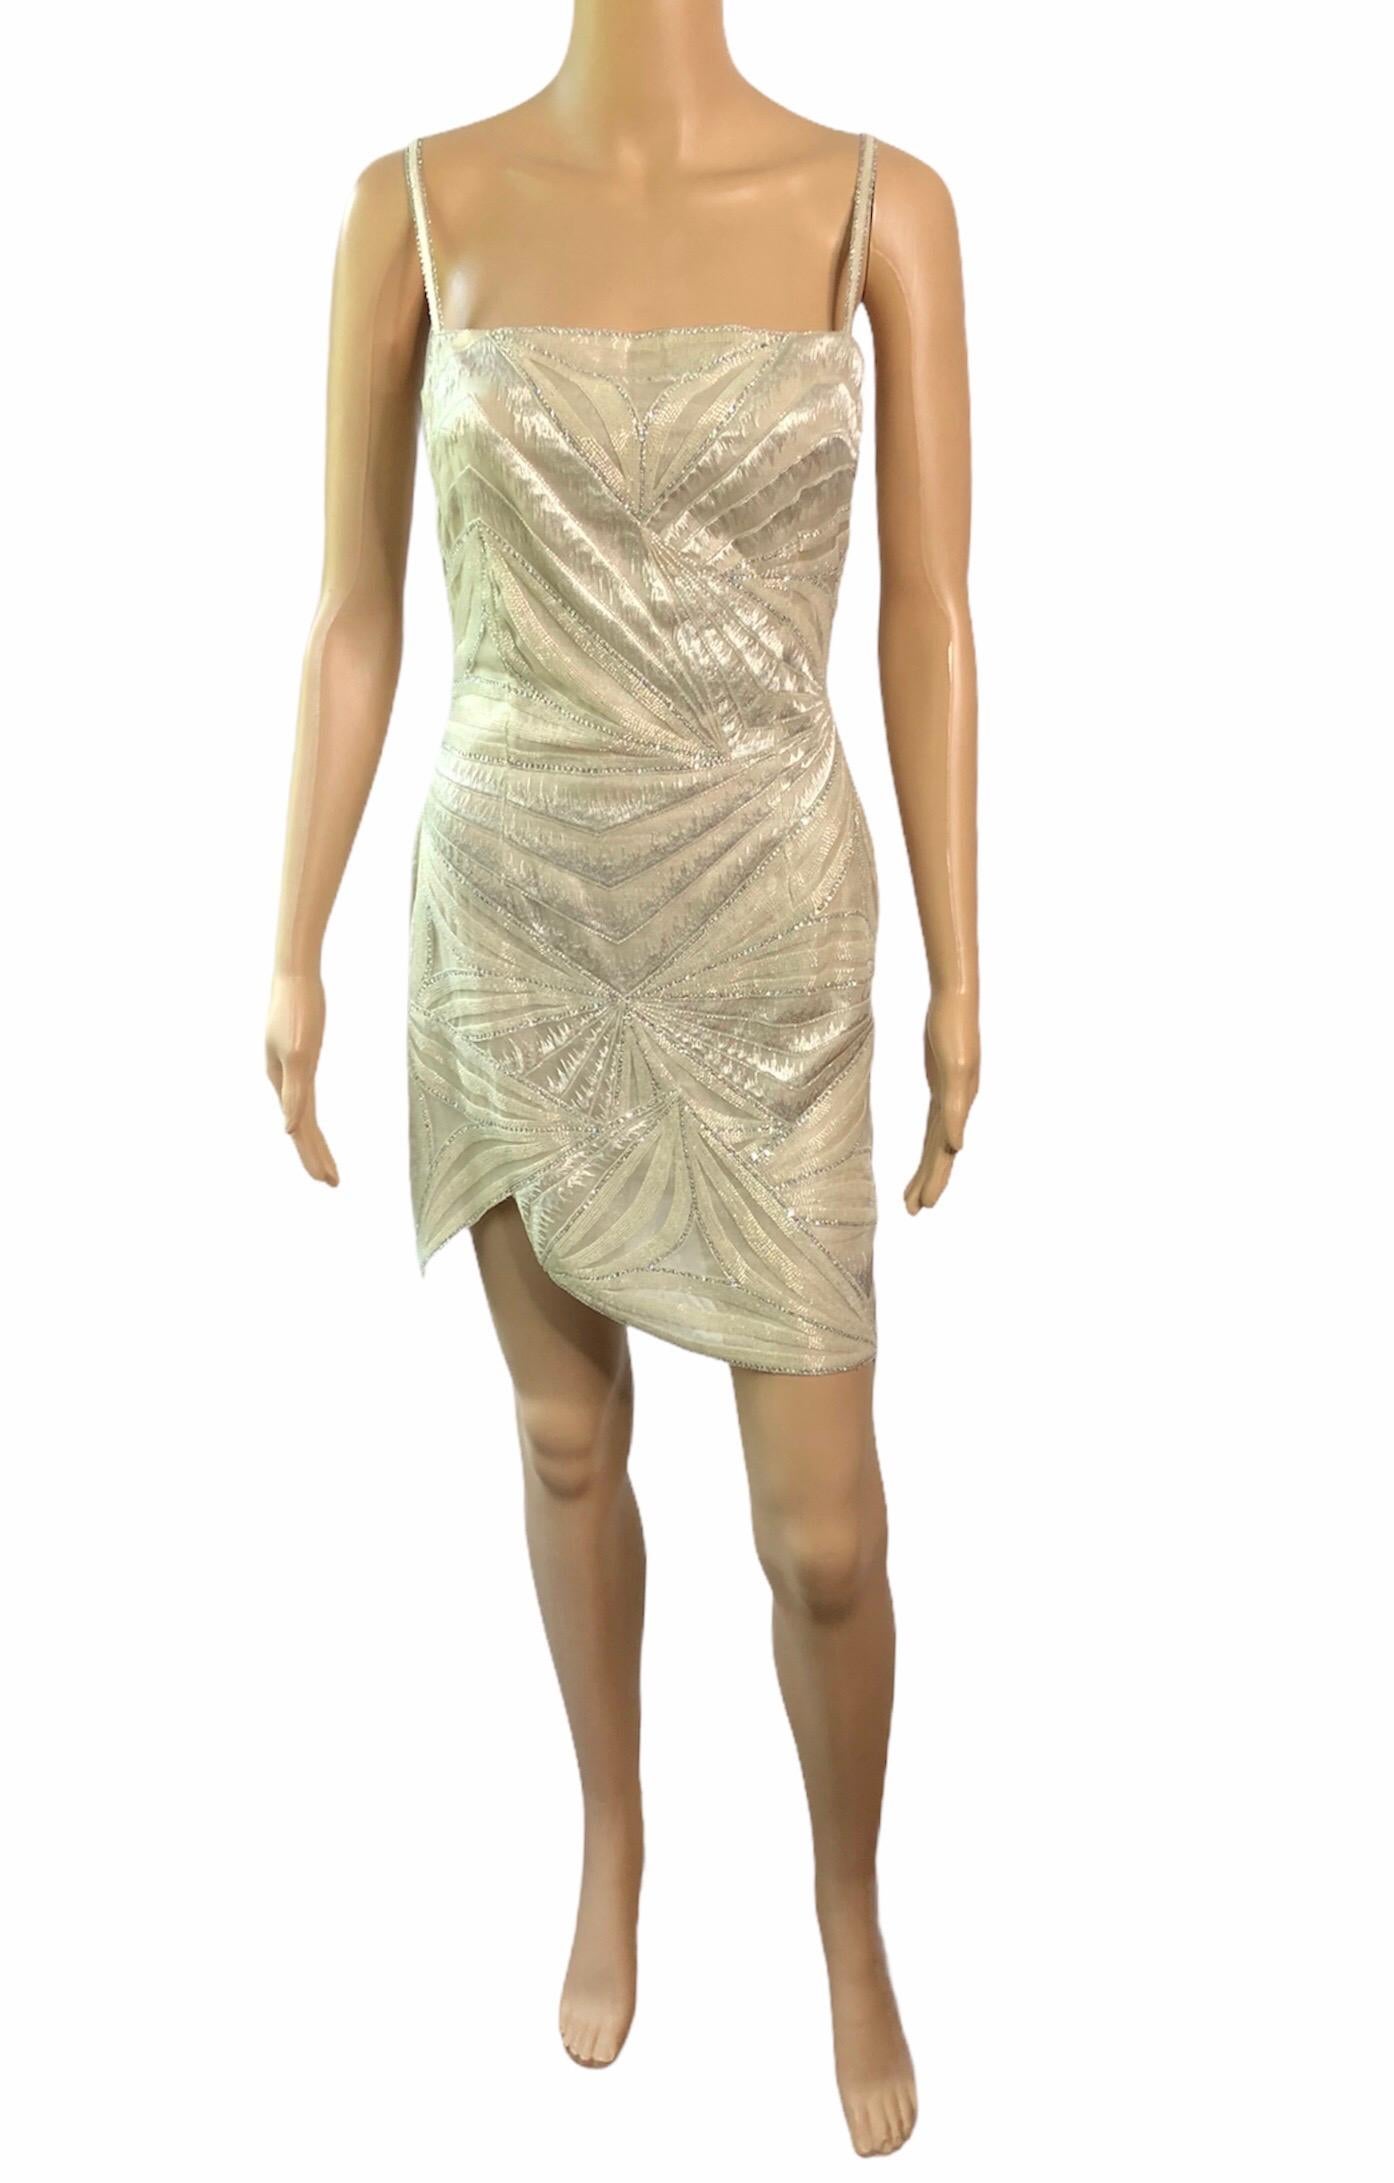 Atelier Versace Haute Couture F/W 1998 Embellished Sheer Cutout Mini Dress For Sale 4